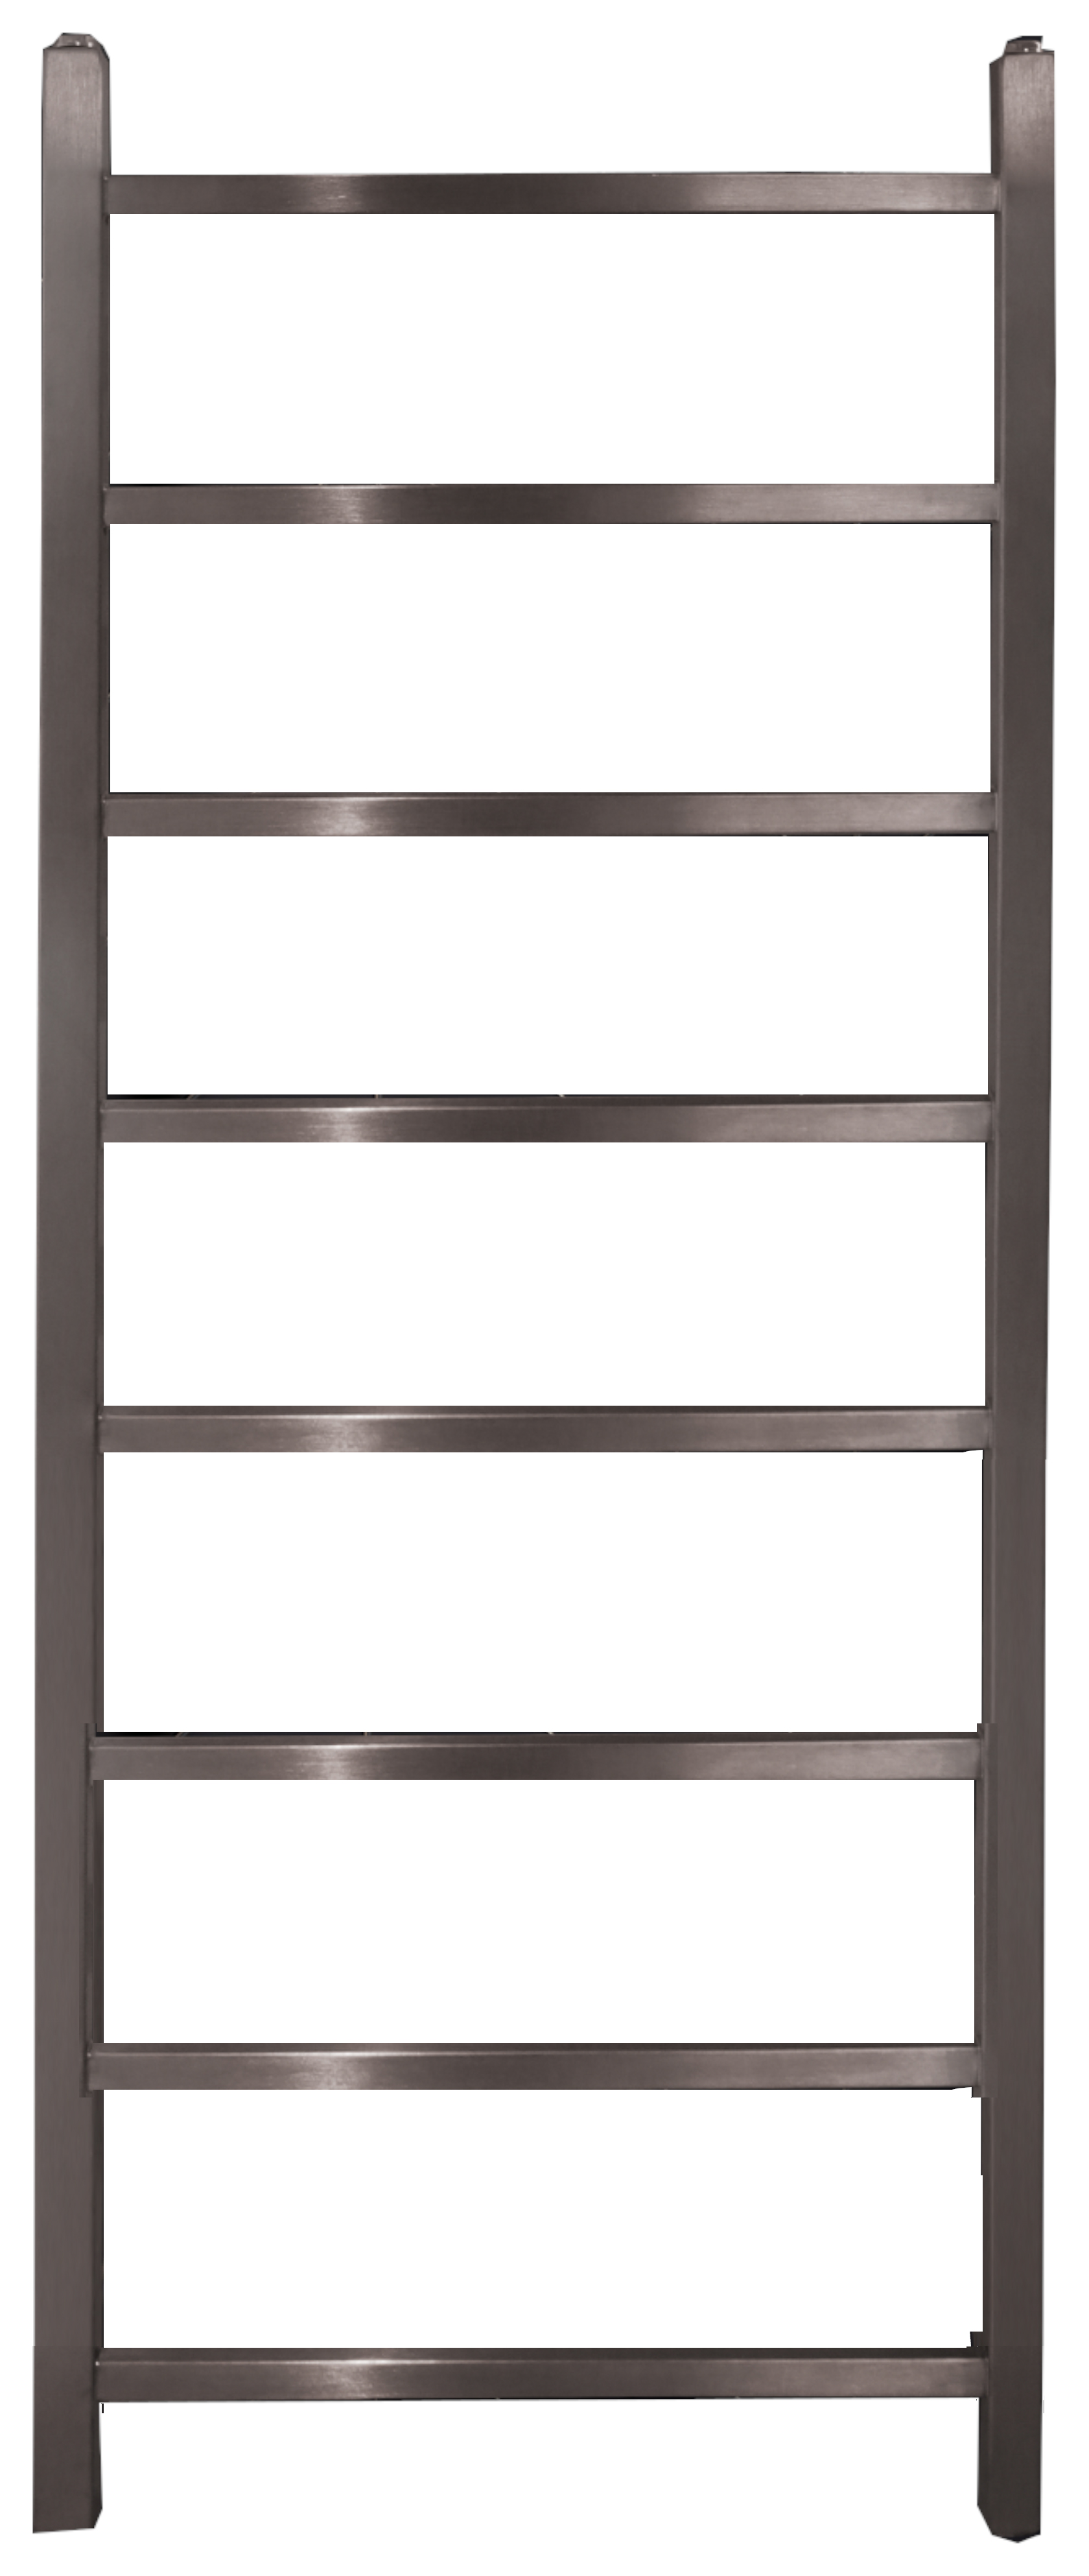 Towelrads Diva Brushed Stainless Steel Dry Electric Non Thermostatic Towel Radiator - 1200 x 500mm